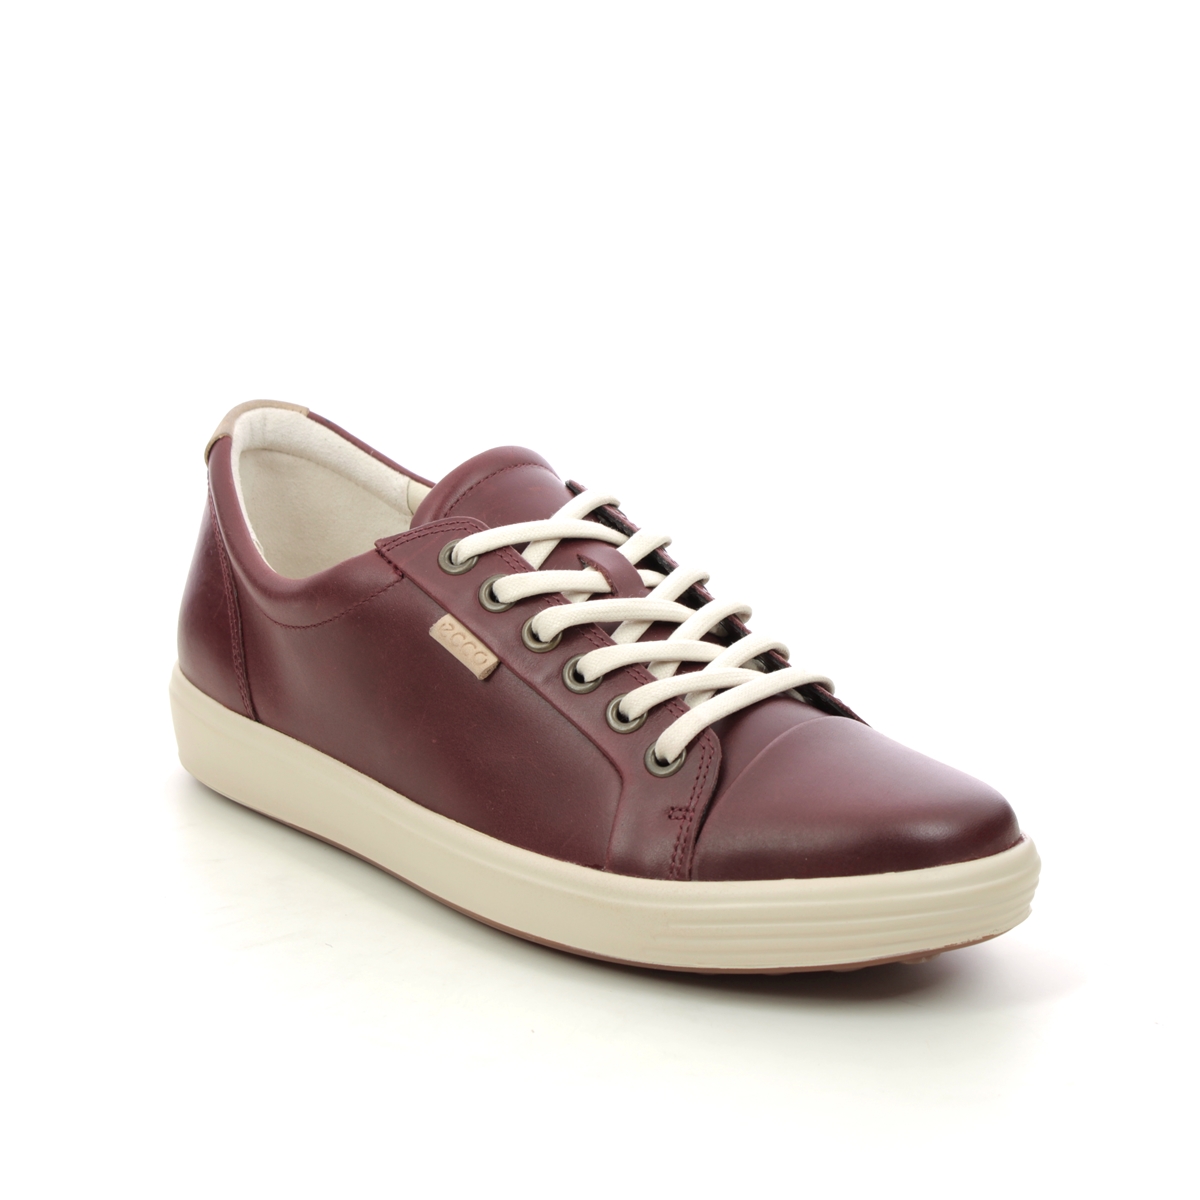 Ecco Soft 7 Lace Plum Womens Trainers 430003-01588 In Size 37 In Plain Plum